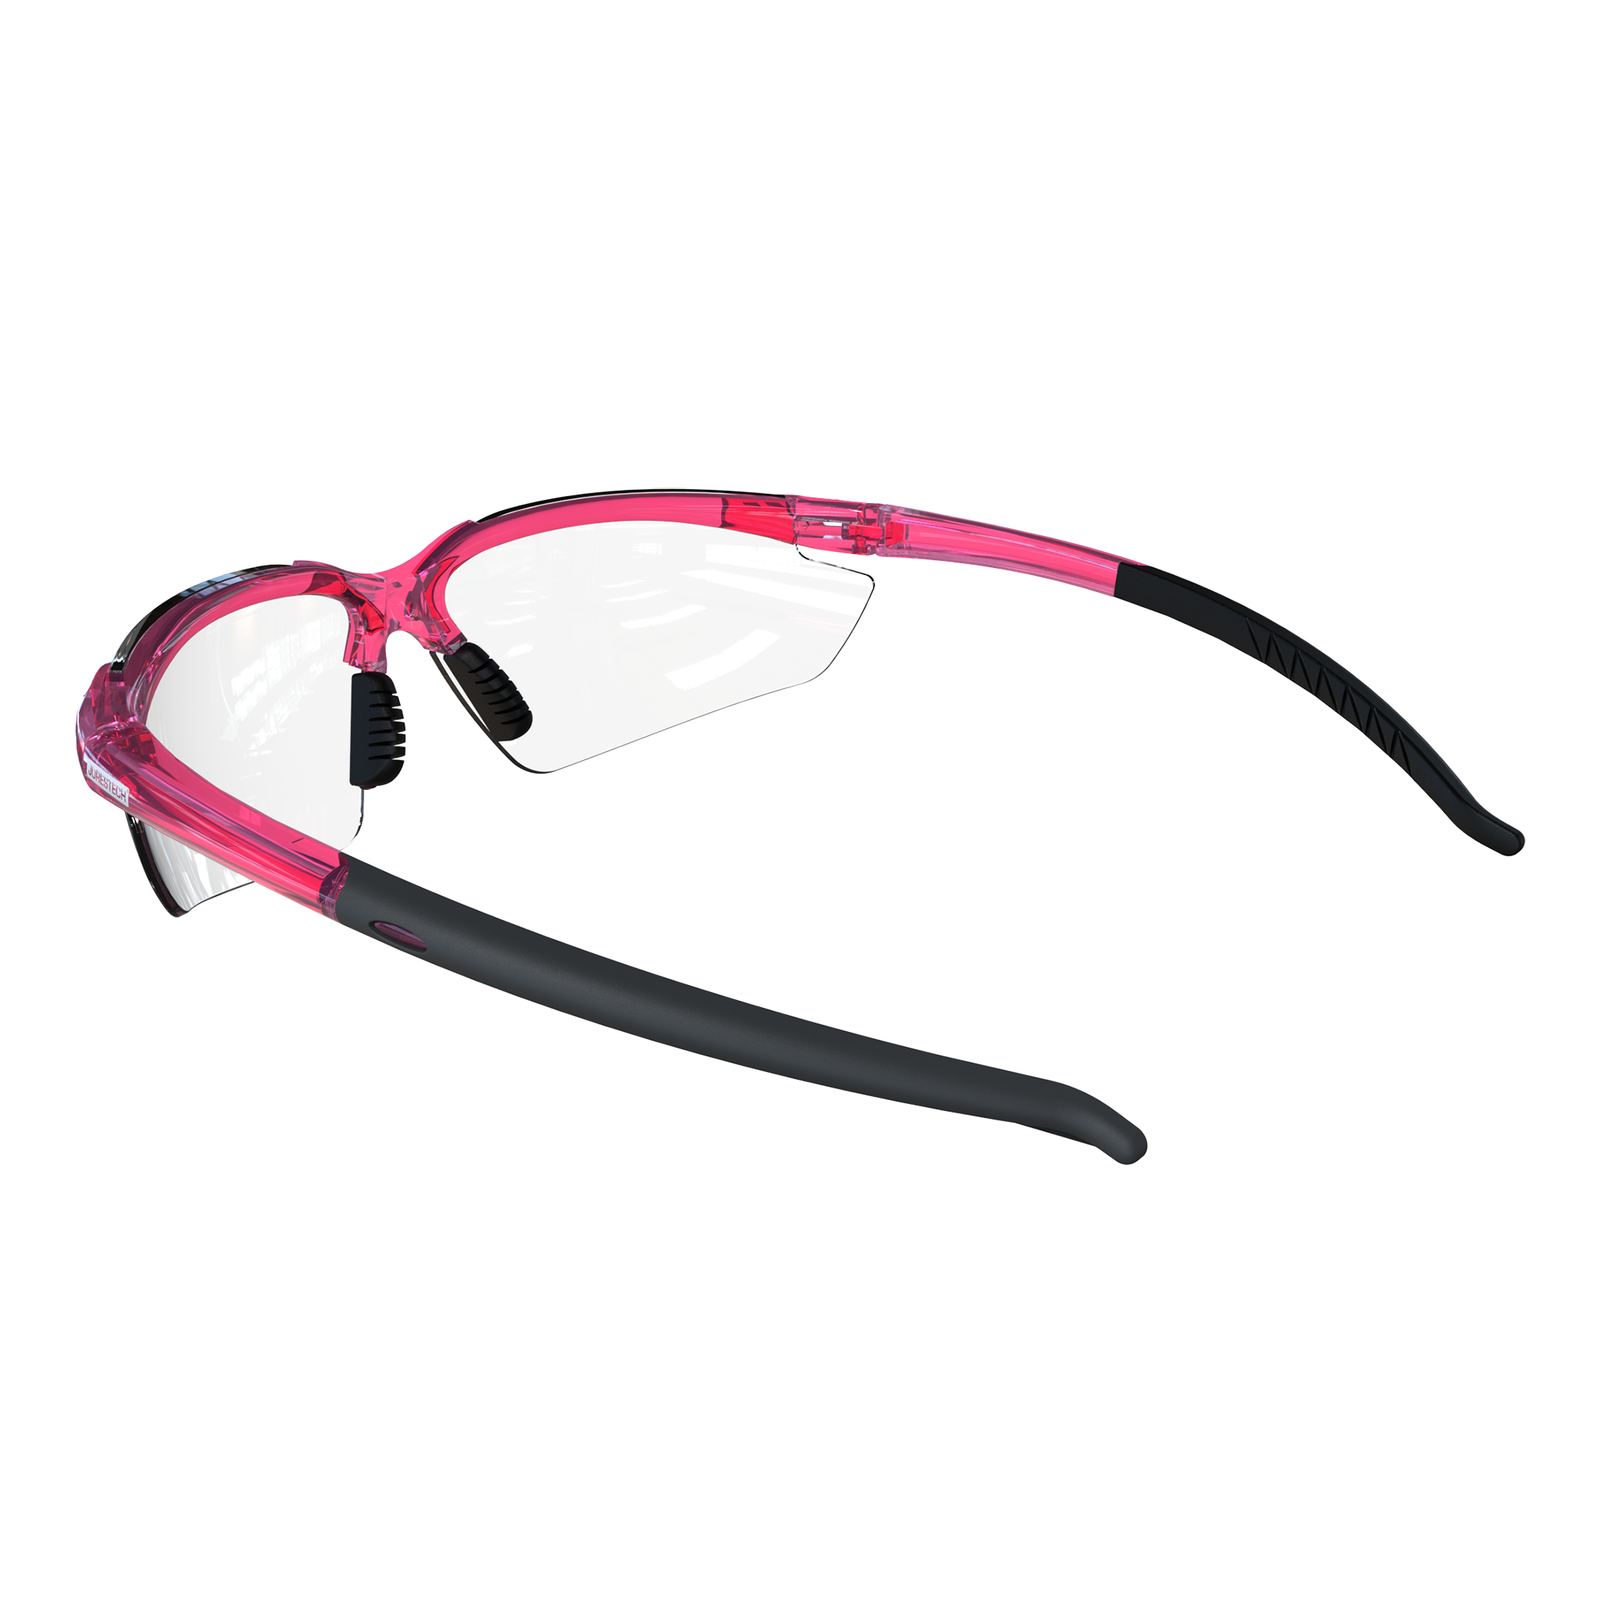 Wraparound safety glasses with flexible rubber temples tip for high impact protection